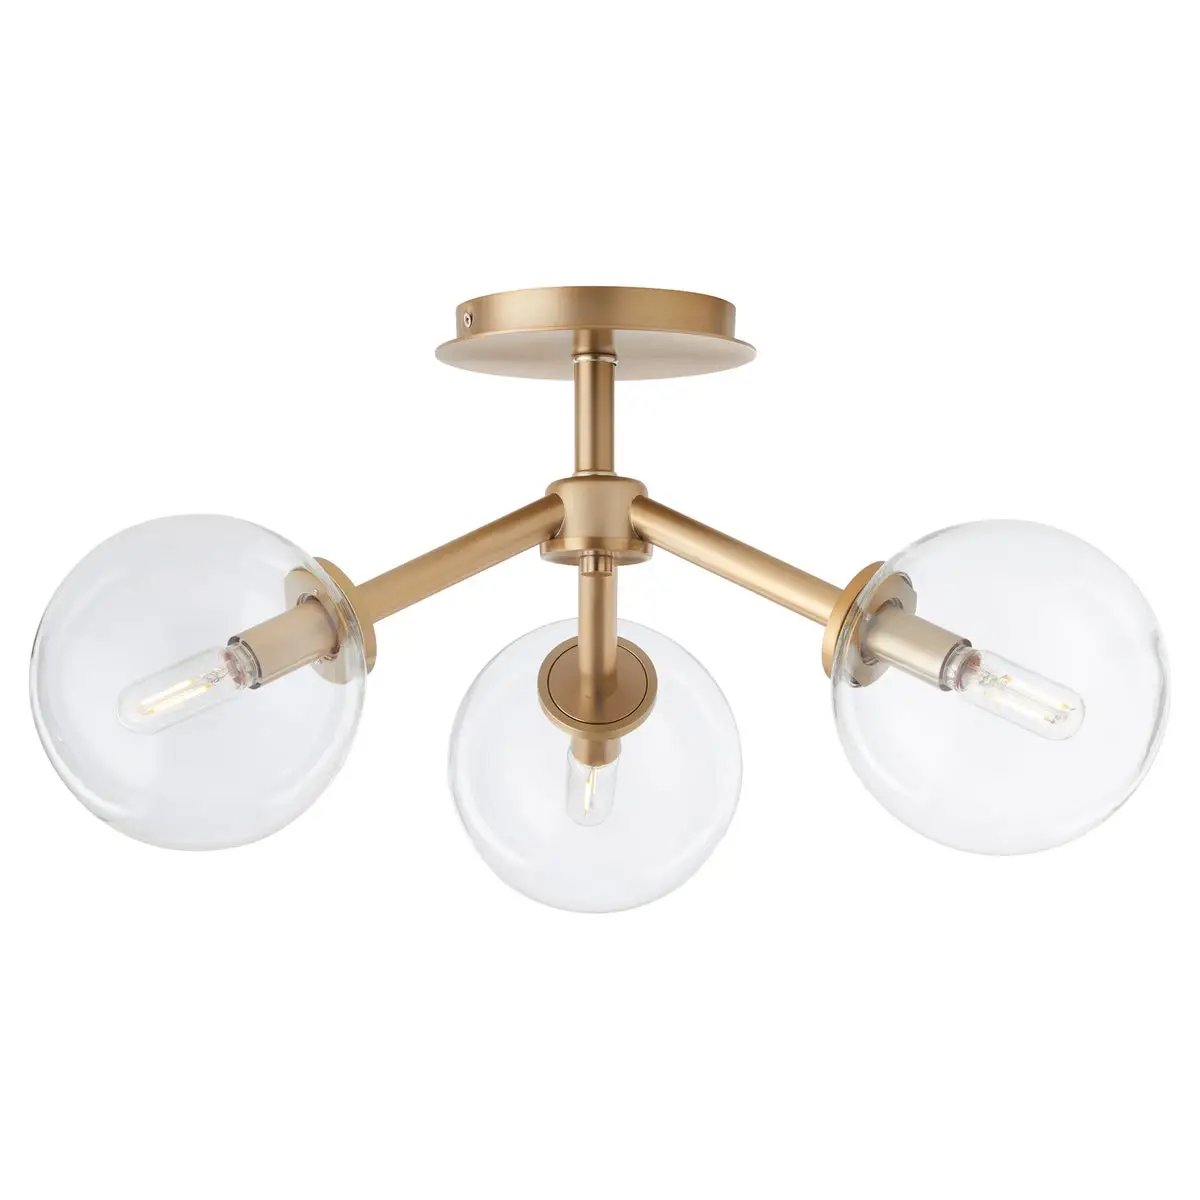 Sputnik Flush Mount Ceiling Light with three clear glass globes and aged brass frames, adding mid-century modern appeal. Perfect for indoor use.